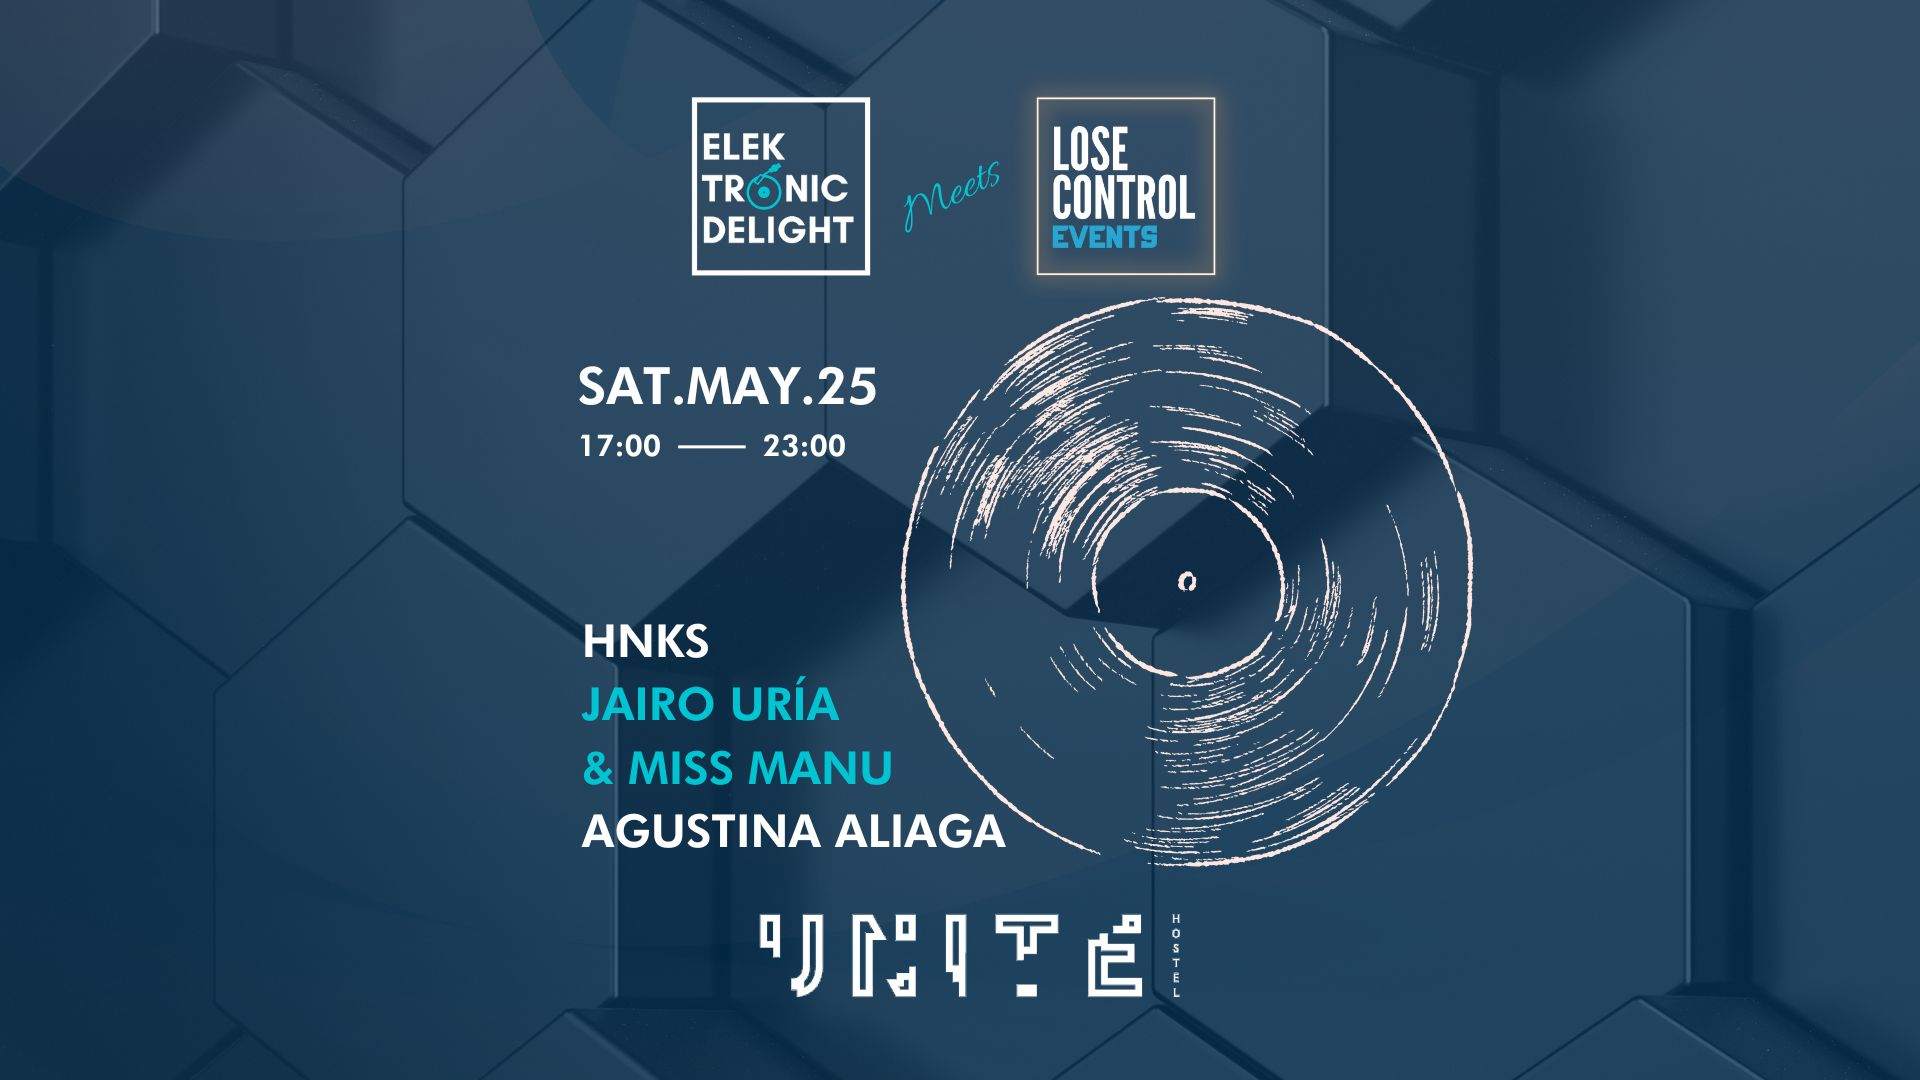 (Day Party) Elektronic Delight meets Lose Control - フライヤー表